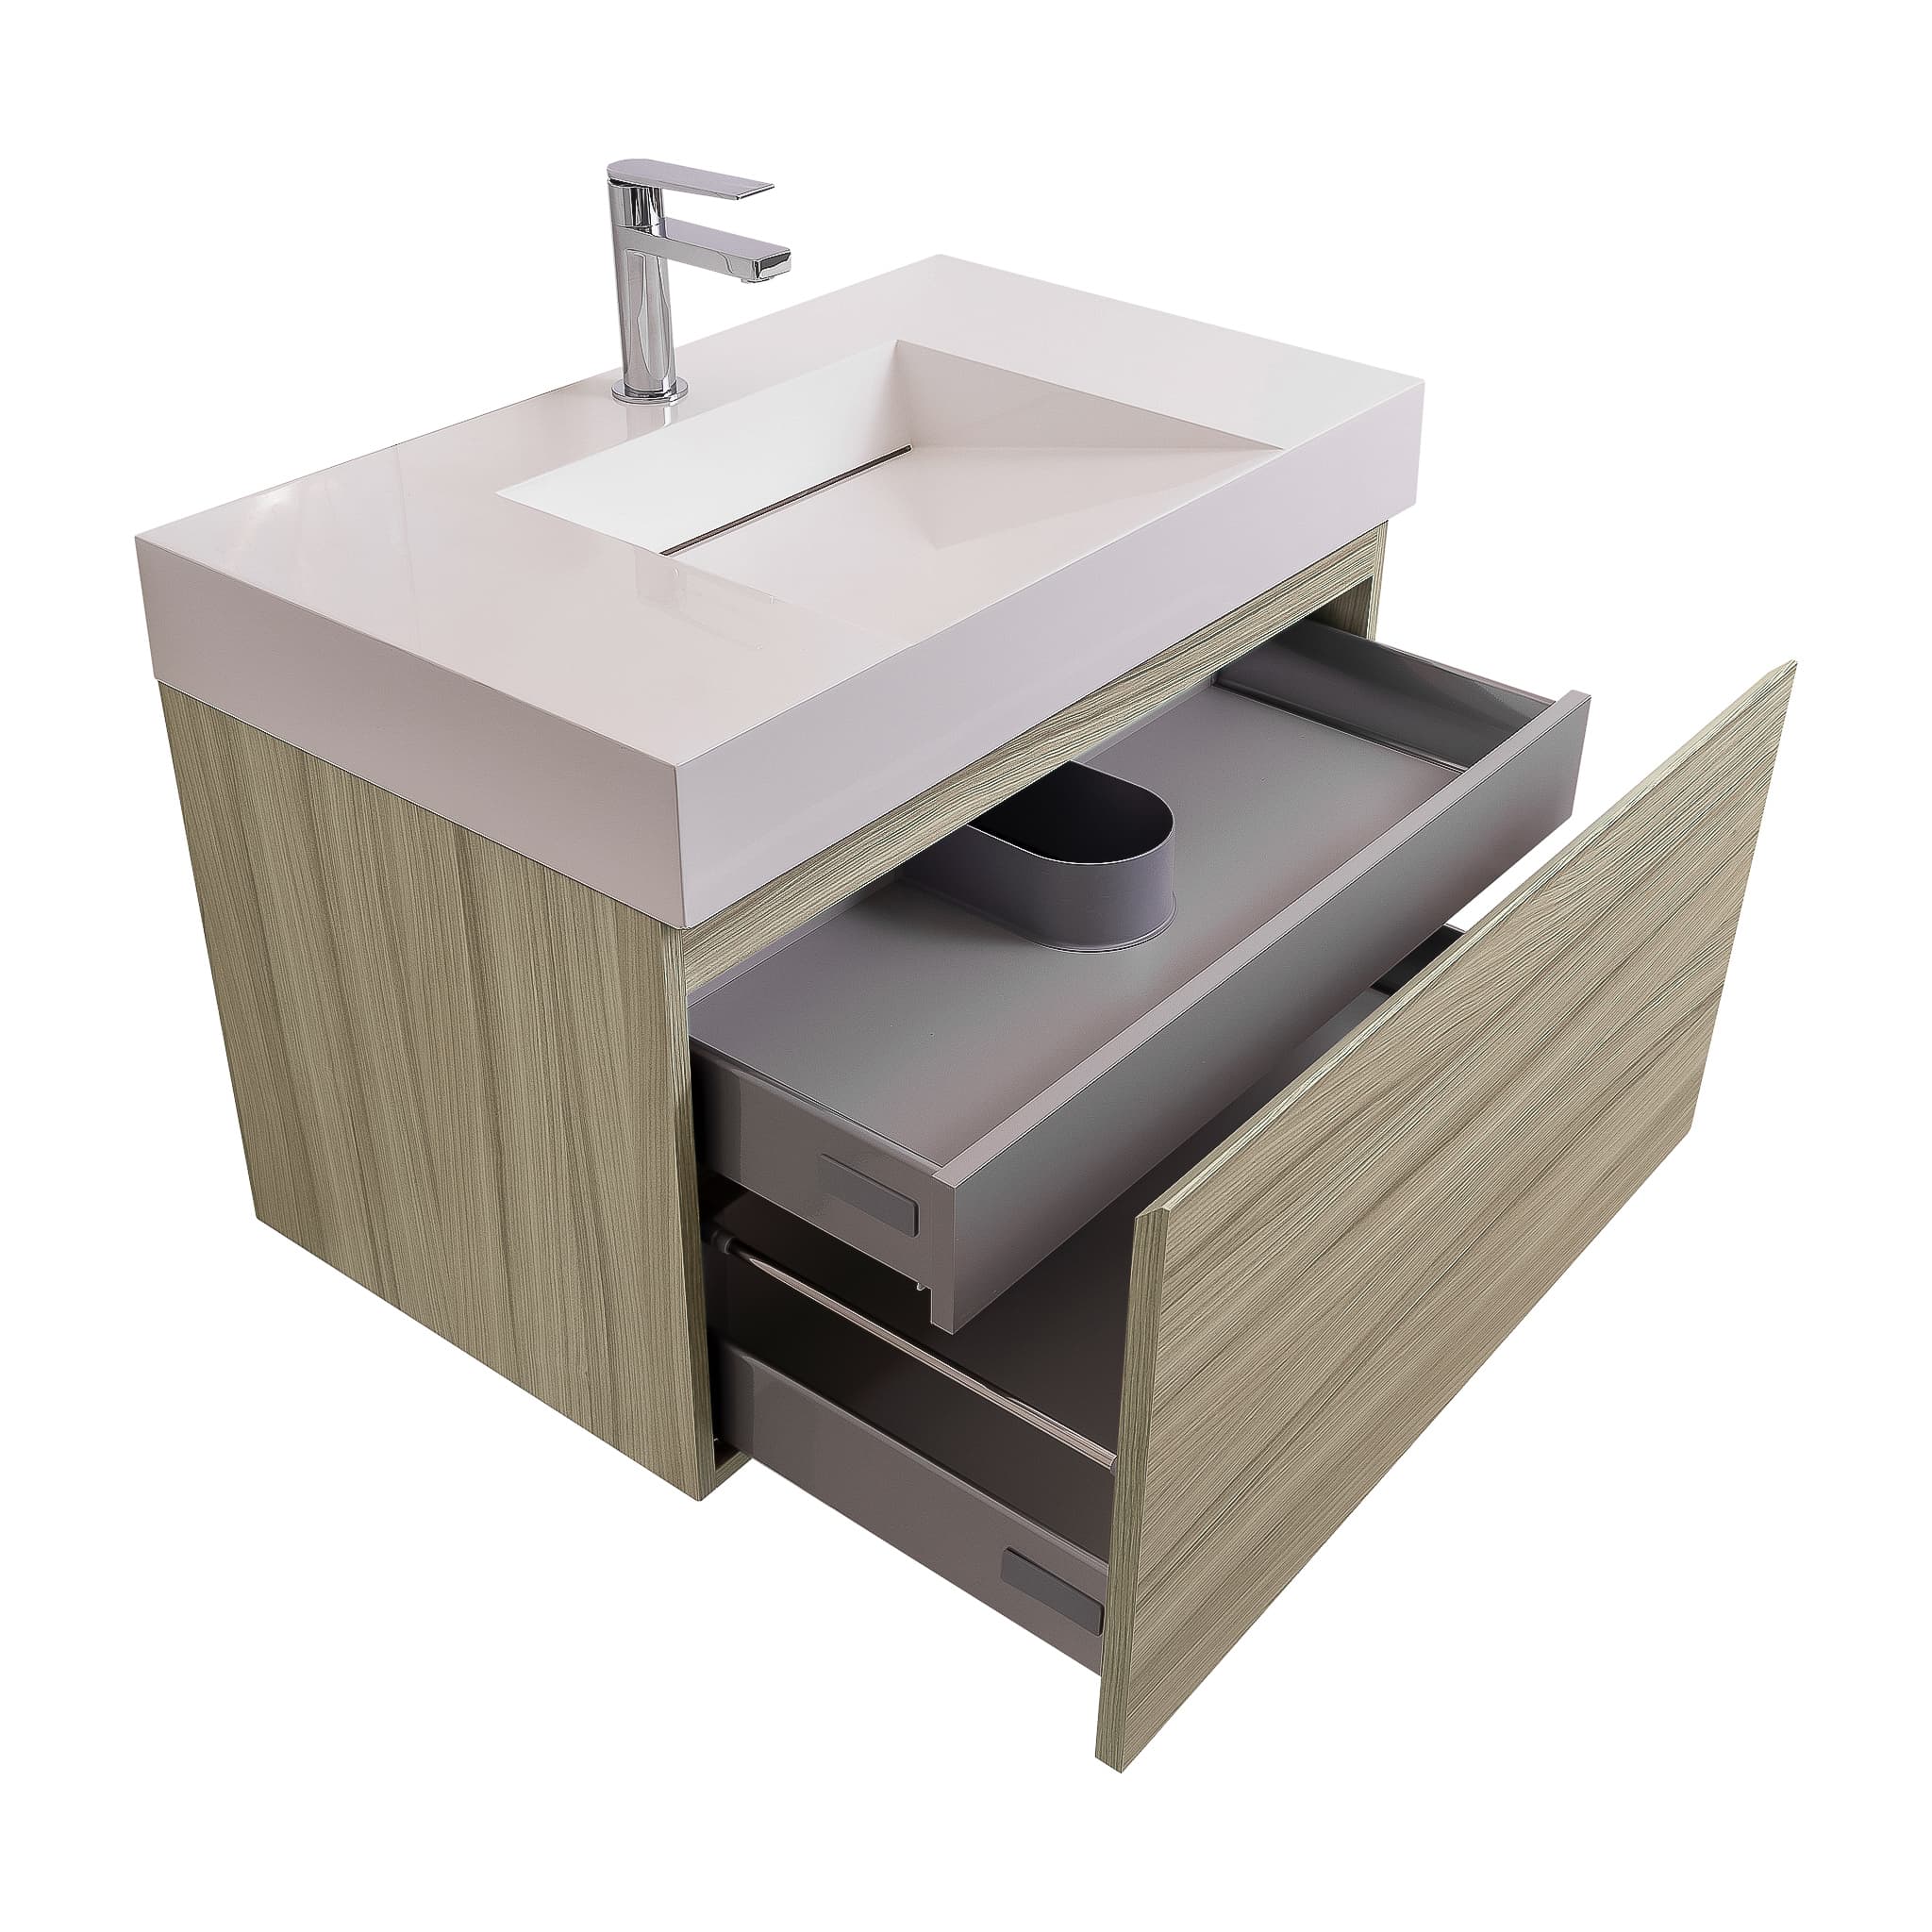 Venice 31.5 Nilo Grey Wood Texture Cabinet, Infinity Cultured Marble Sink, Wall Mounted Modern Vanity Set